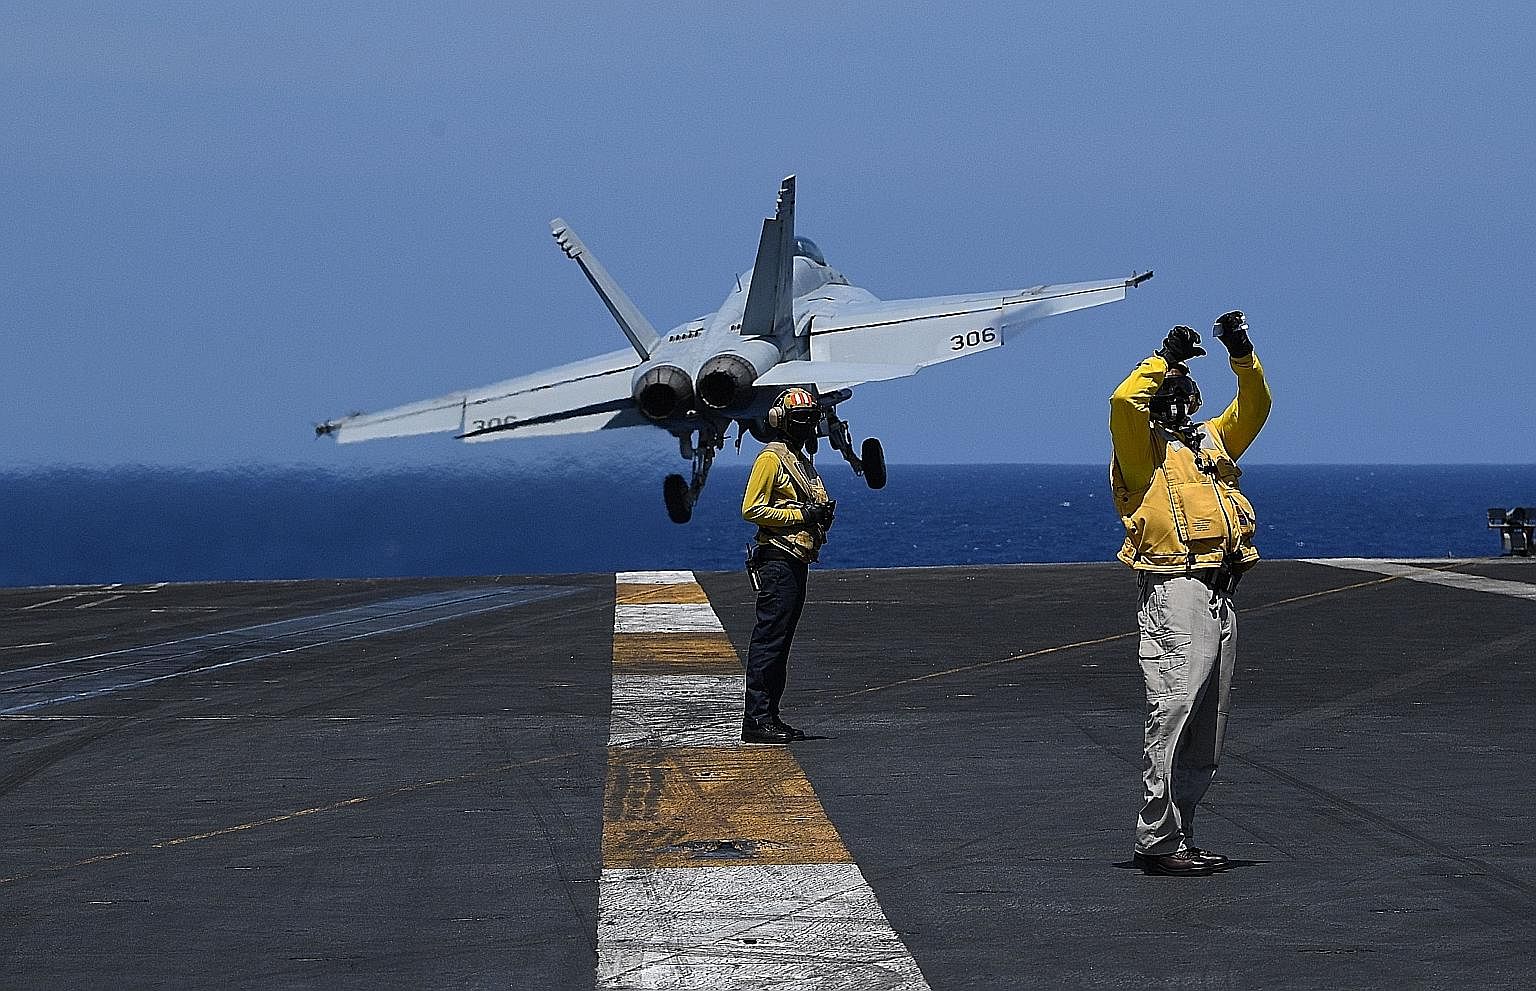 Sailors on flight deck duty as an FA-18 hornet fighter jet took off during routine training aboard US aircraft carrier Theodore Roosevelt in the South China Sea in April. As defence officials gather to discuss some of the Indo-Pacific's most pressing